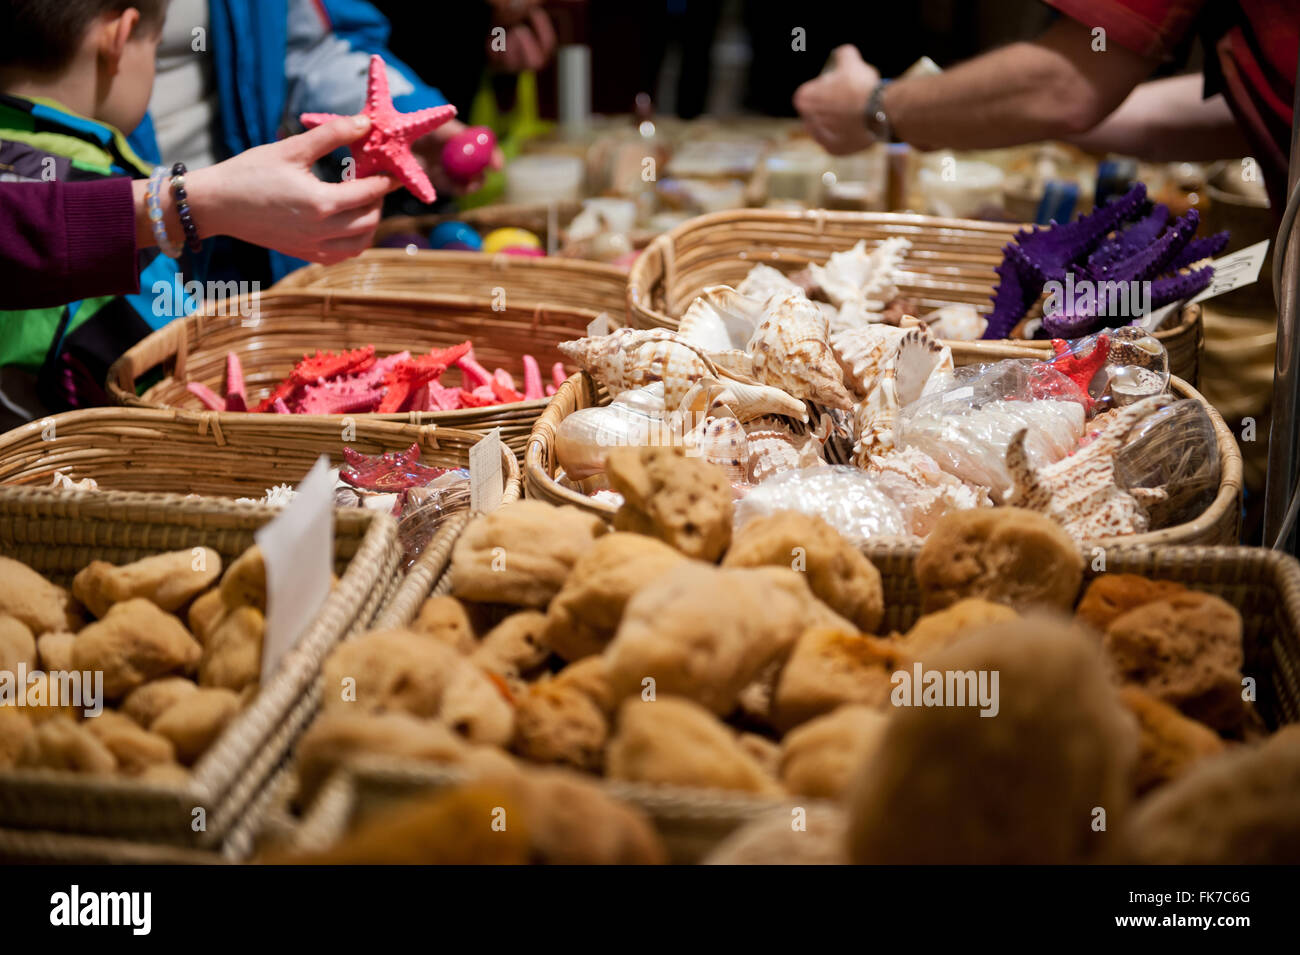 Clients buying sea animals, natural sponges, shells and starfish lying in baskets for sale at Warsaw Mineral Expo 2016, Poland Stock Photo